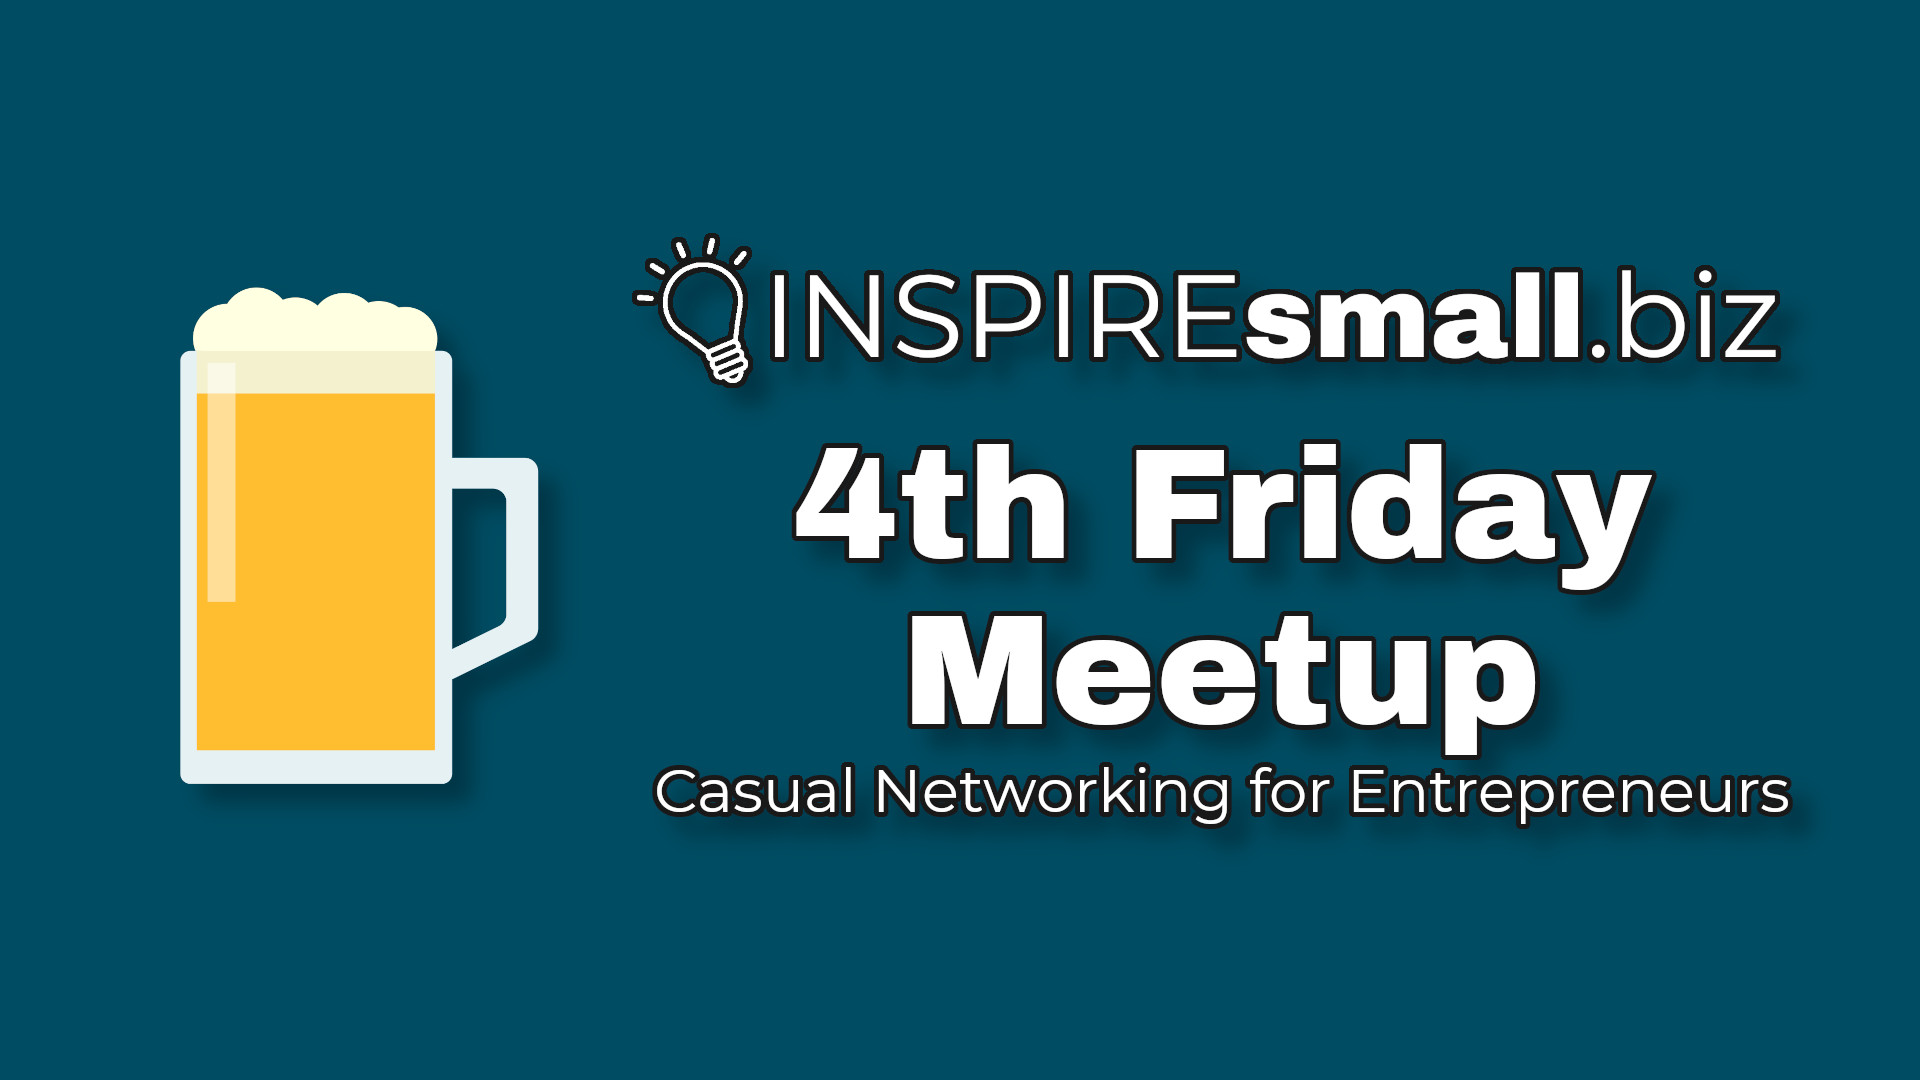 4th Friday Meetup - Networking for Entrepreneurs